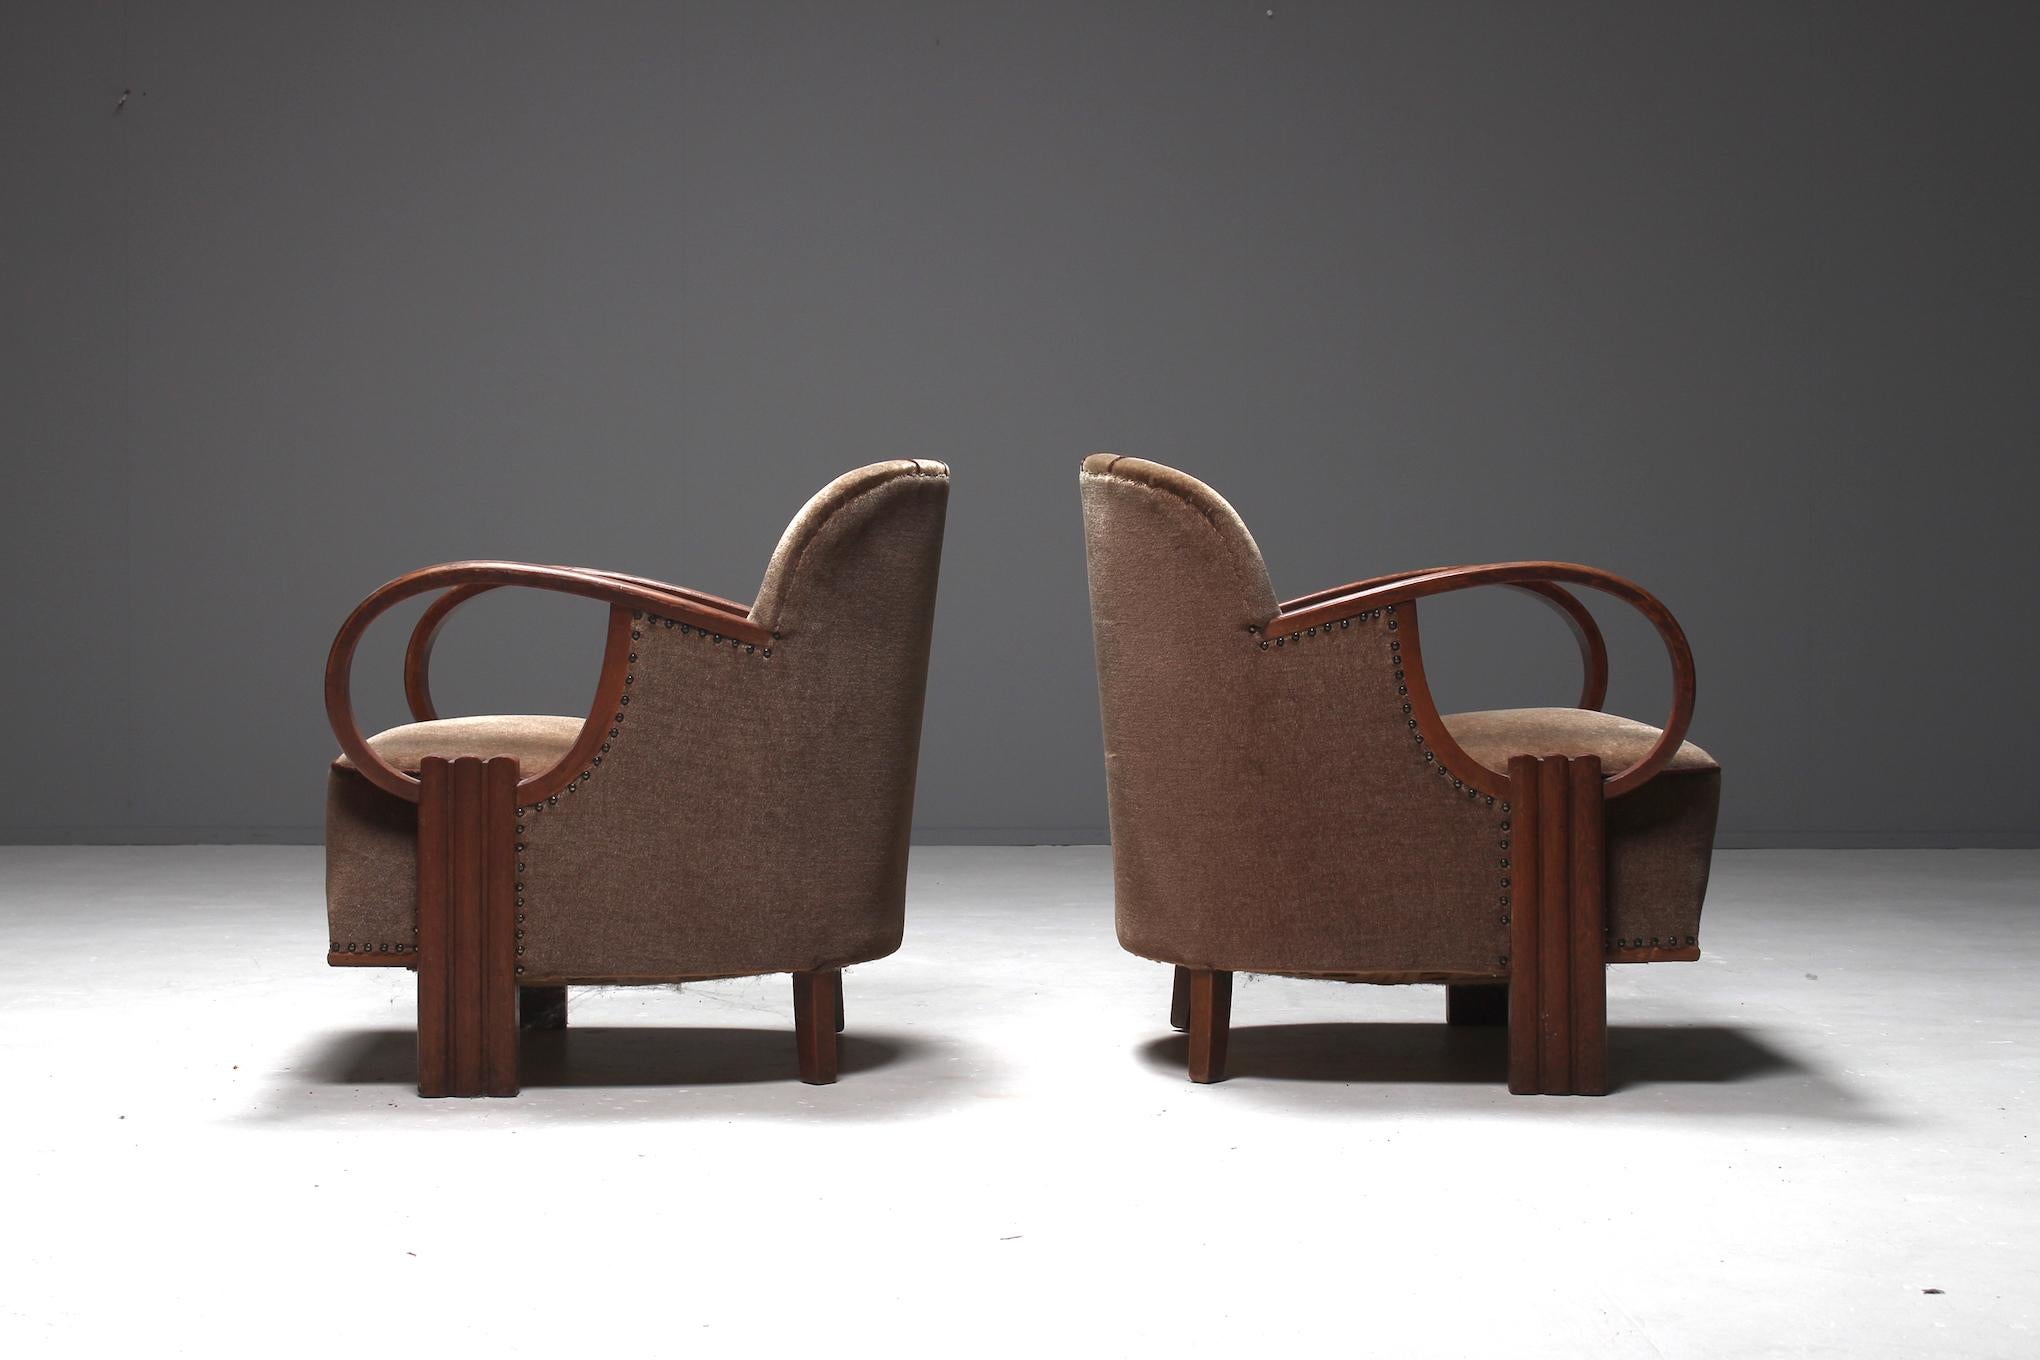 Pair of French Jean Pascaud Style Art Deco Club Chairs in Oak and Velvet, 1930s For Sale 1